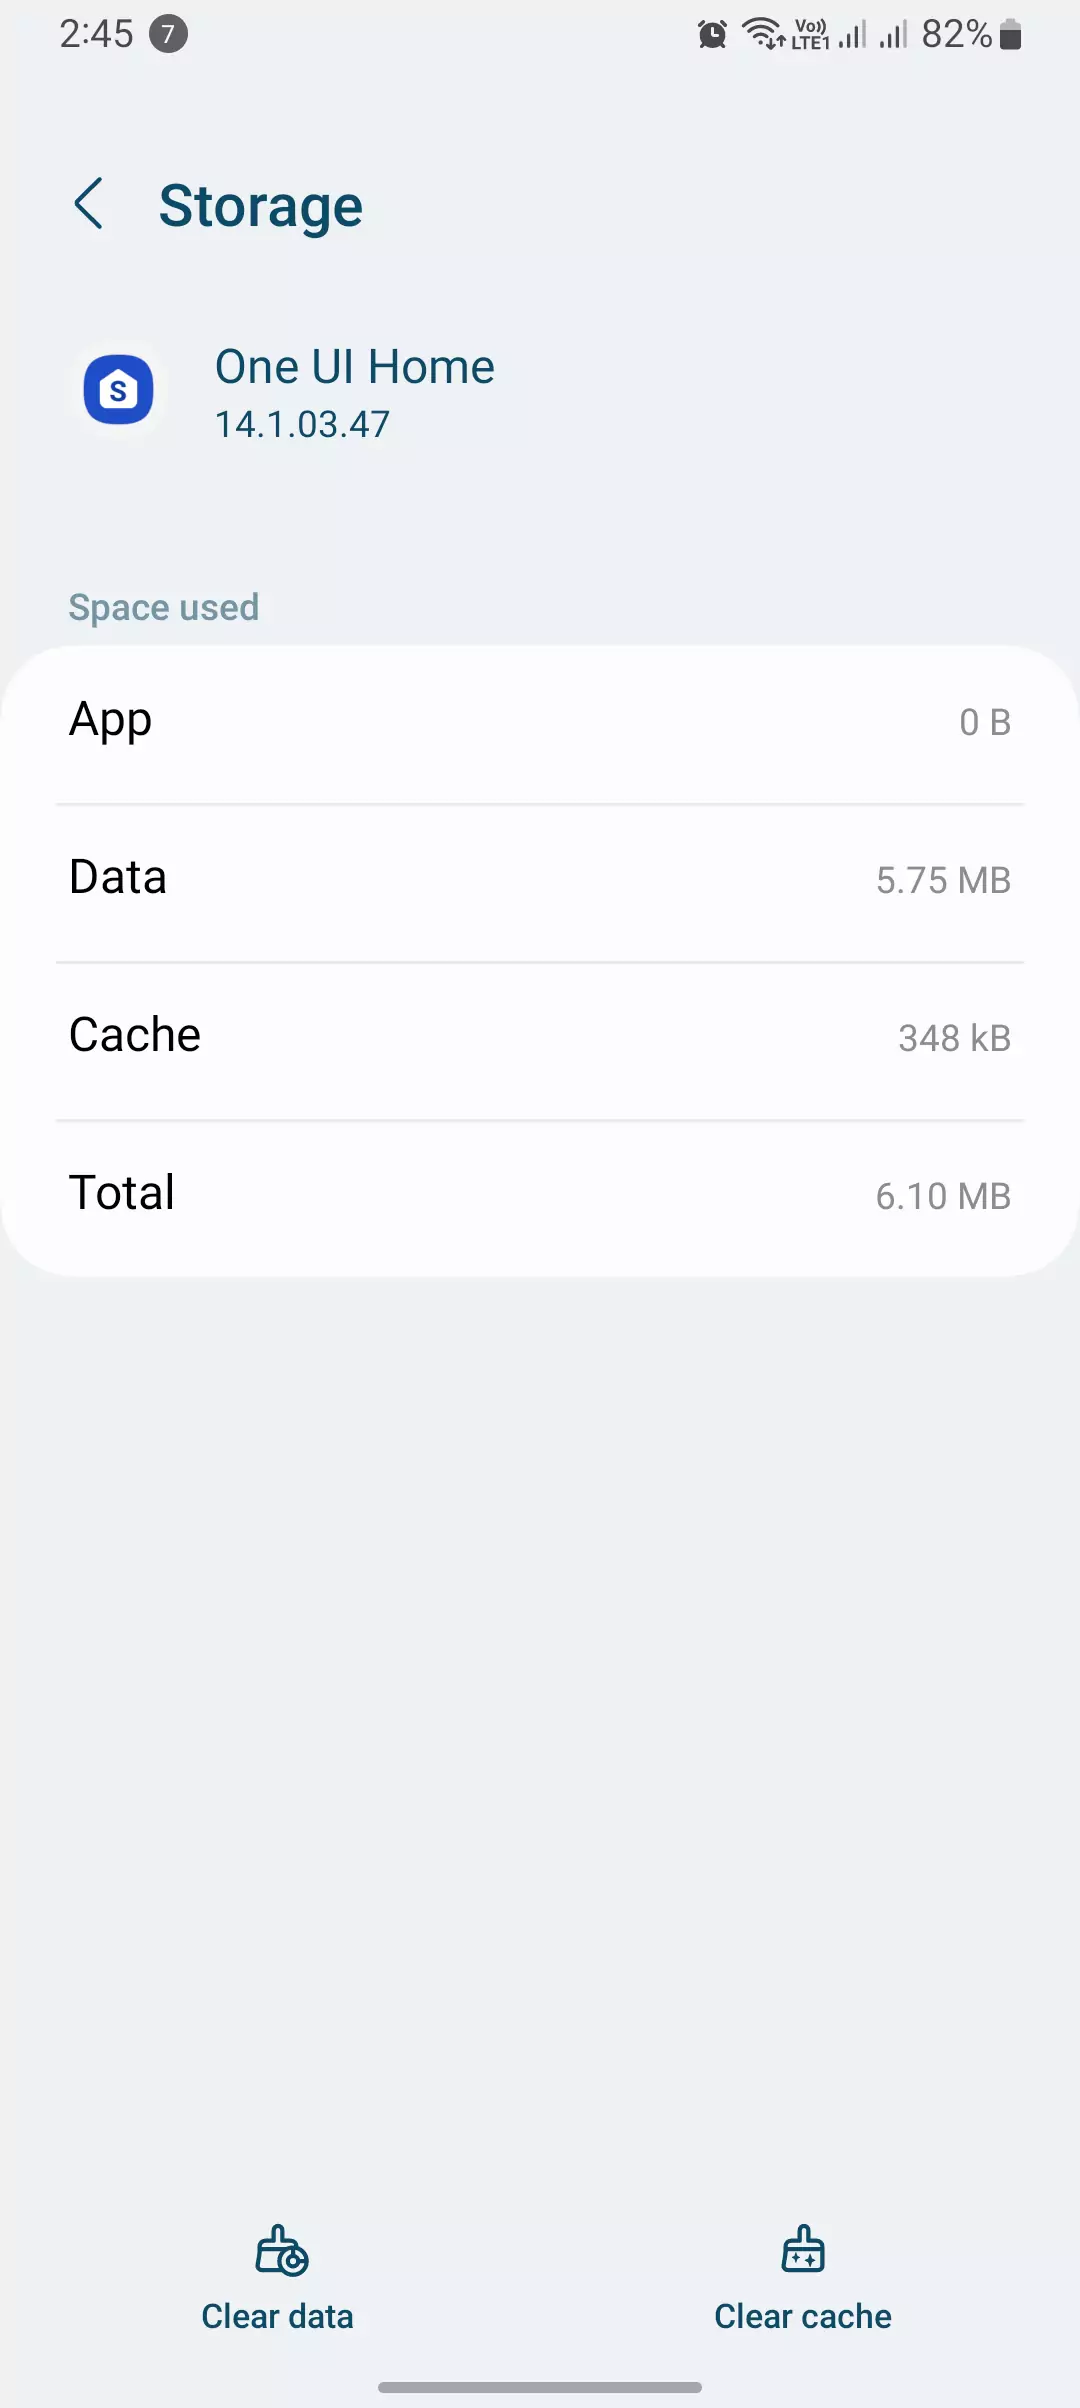 oneui app storage screenshot of clear cache and clear data